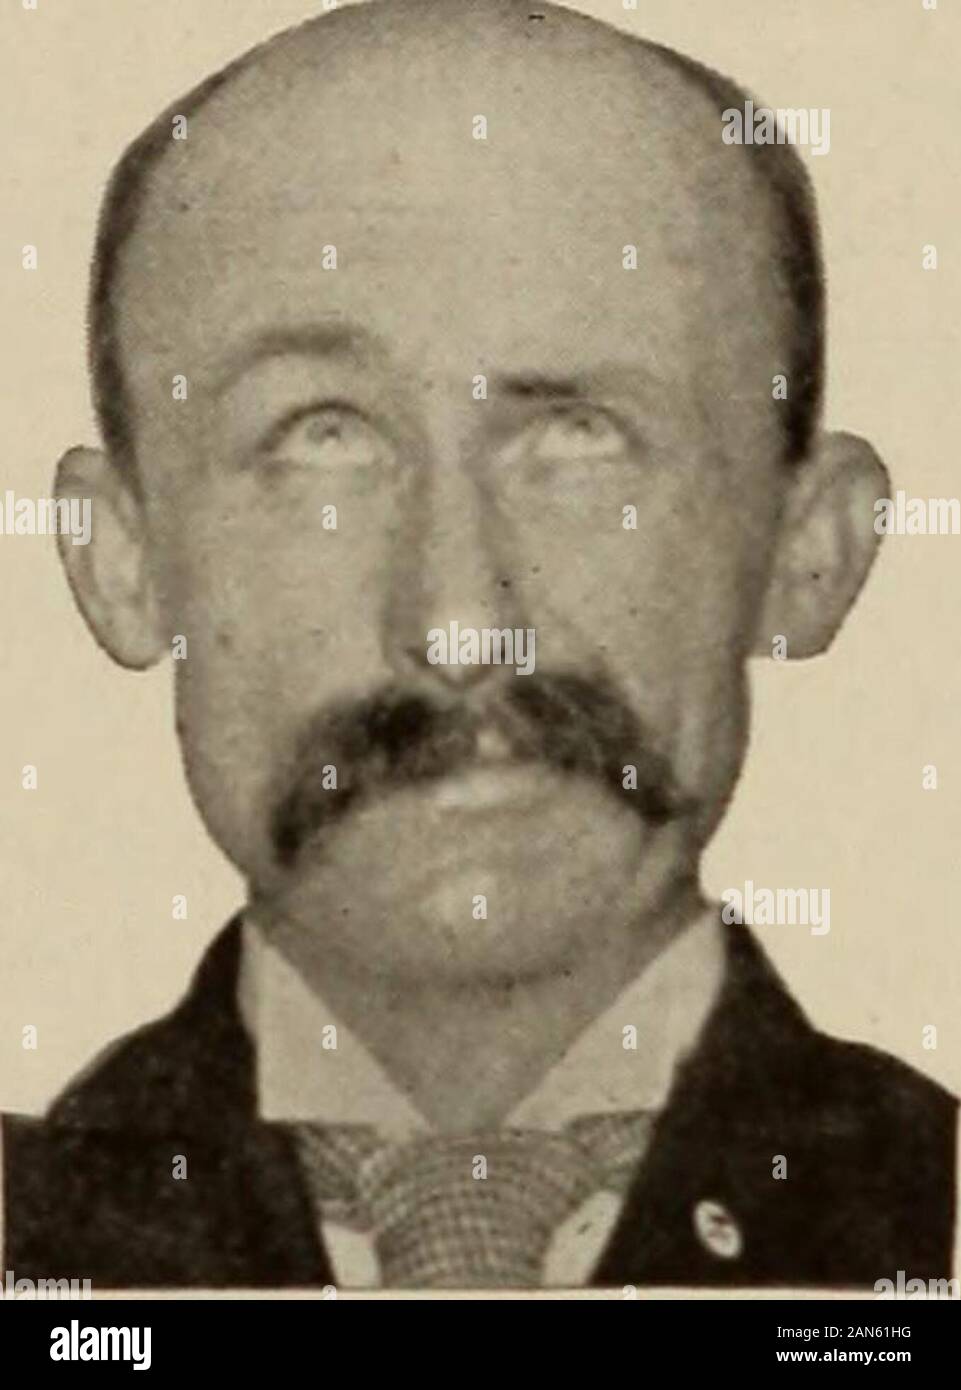 Nervous and mental diseases . 11 Mm^iiU iIm^I. Fig. 49.—Same case six months later. 9 shows late contracture on xhv paretic side while the faceis at rest; 10, contracture in the lower half of the face increased by gently closing the eyes, and at thesame time shows weakness about left eye; 11, contracture increased by raising brows, showing over-action of zygoniatici and weakness of frontalis on left side. As the face recovers, in every instance the paretic side is likelv tooveract for all moderate voluntary bilateral movements. It would seemthat the neuritis had left a certain nuclear irritabi Stock Photo